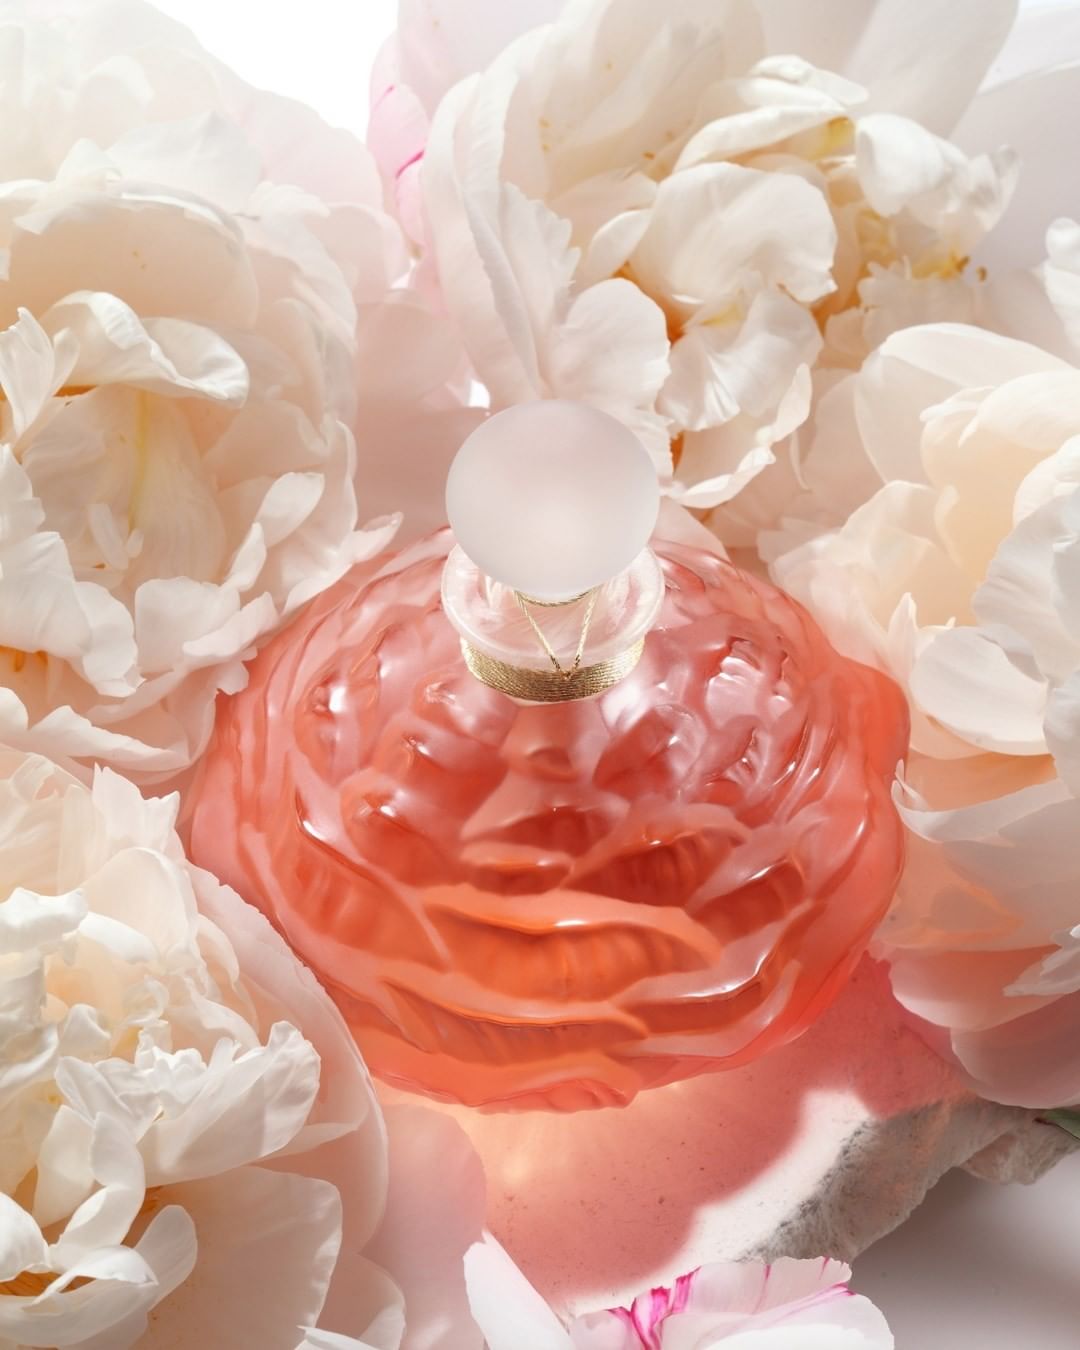 LALIQUE - A passionate observer of nature, René Lalique drew some of his most fabulous motifs from the graceful, infinitely varied forms of flowers. As a tribute to his inspiration, the House of Laliq...